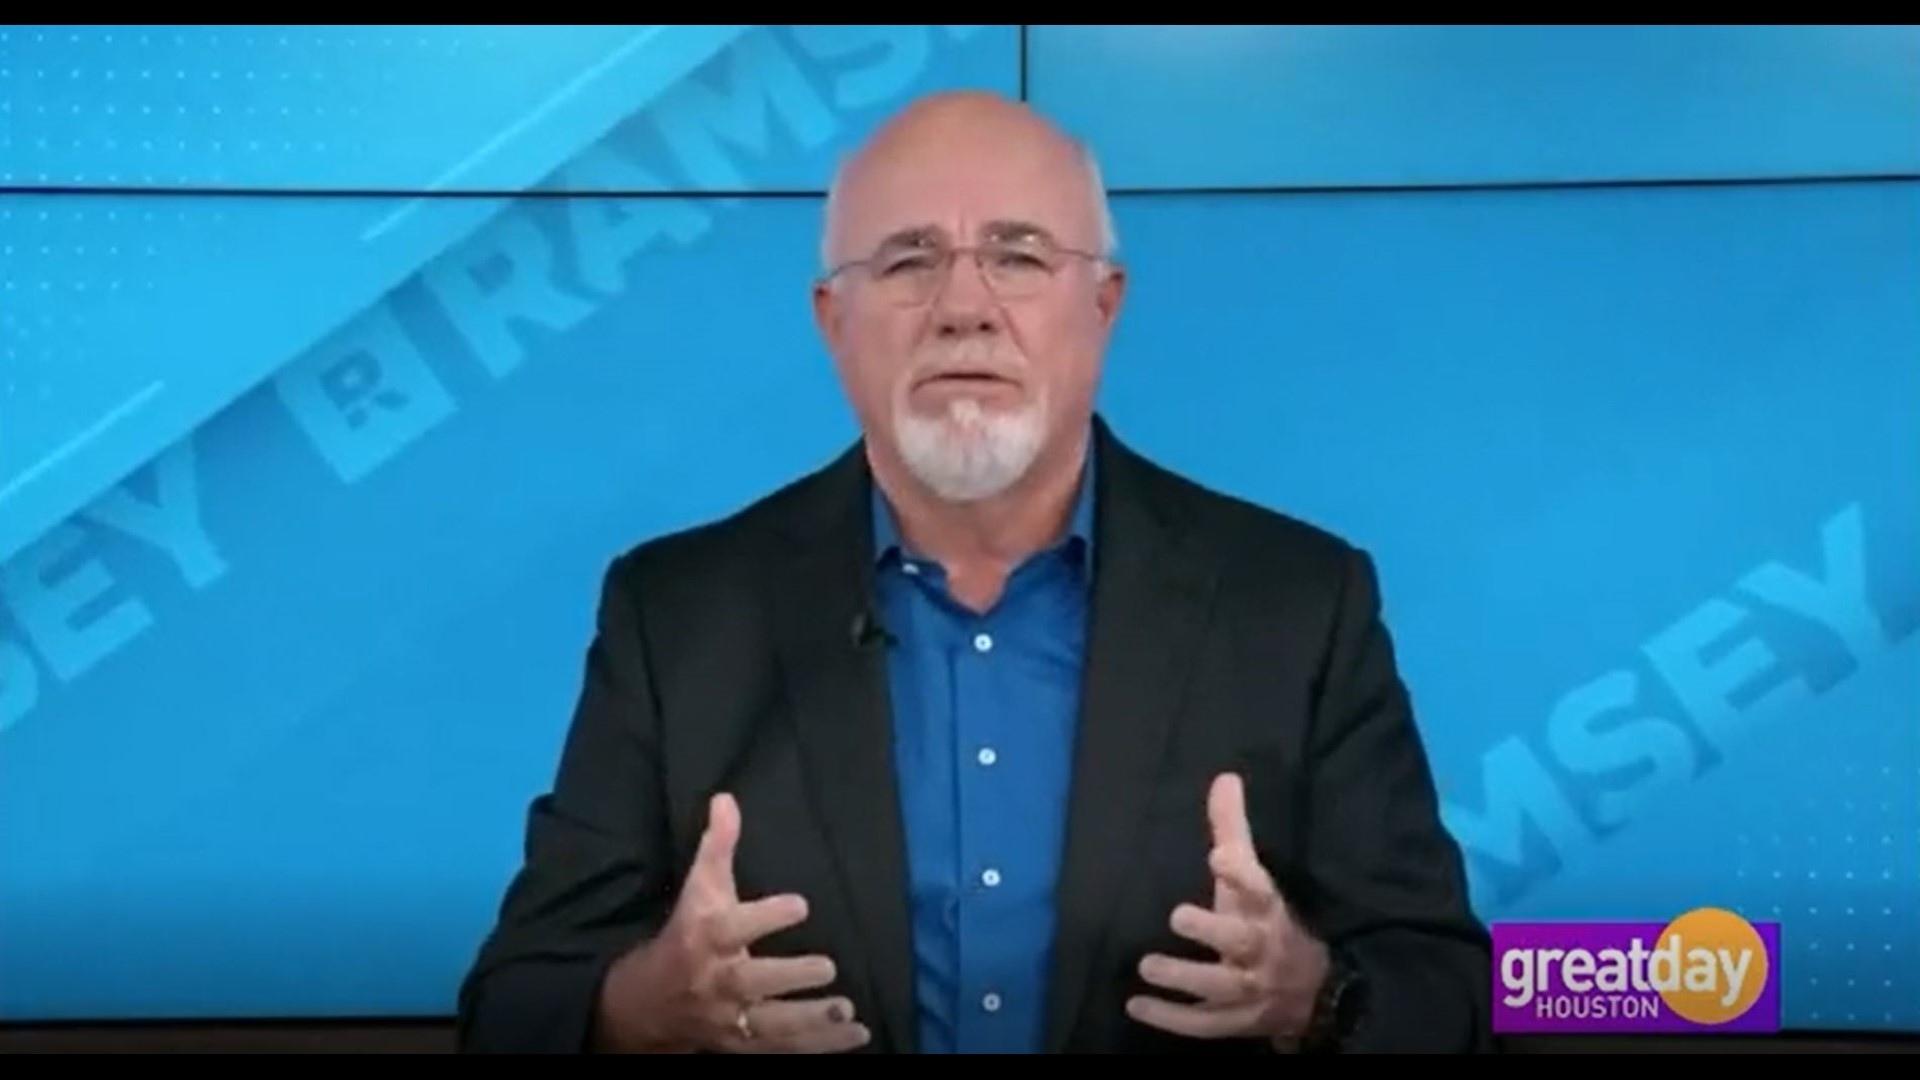 It's never too late to build wealth using Dave Ramsey's "Baby Steps" so start now!